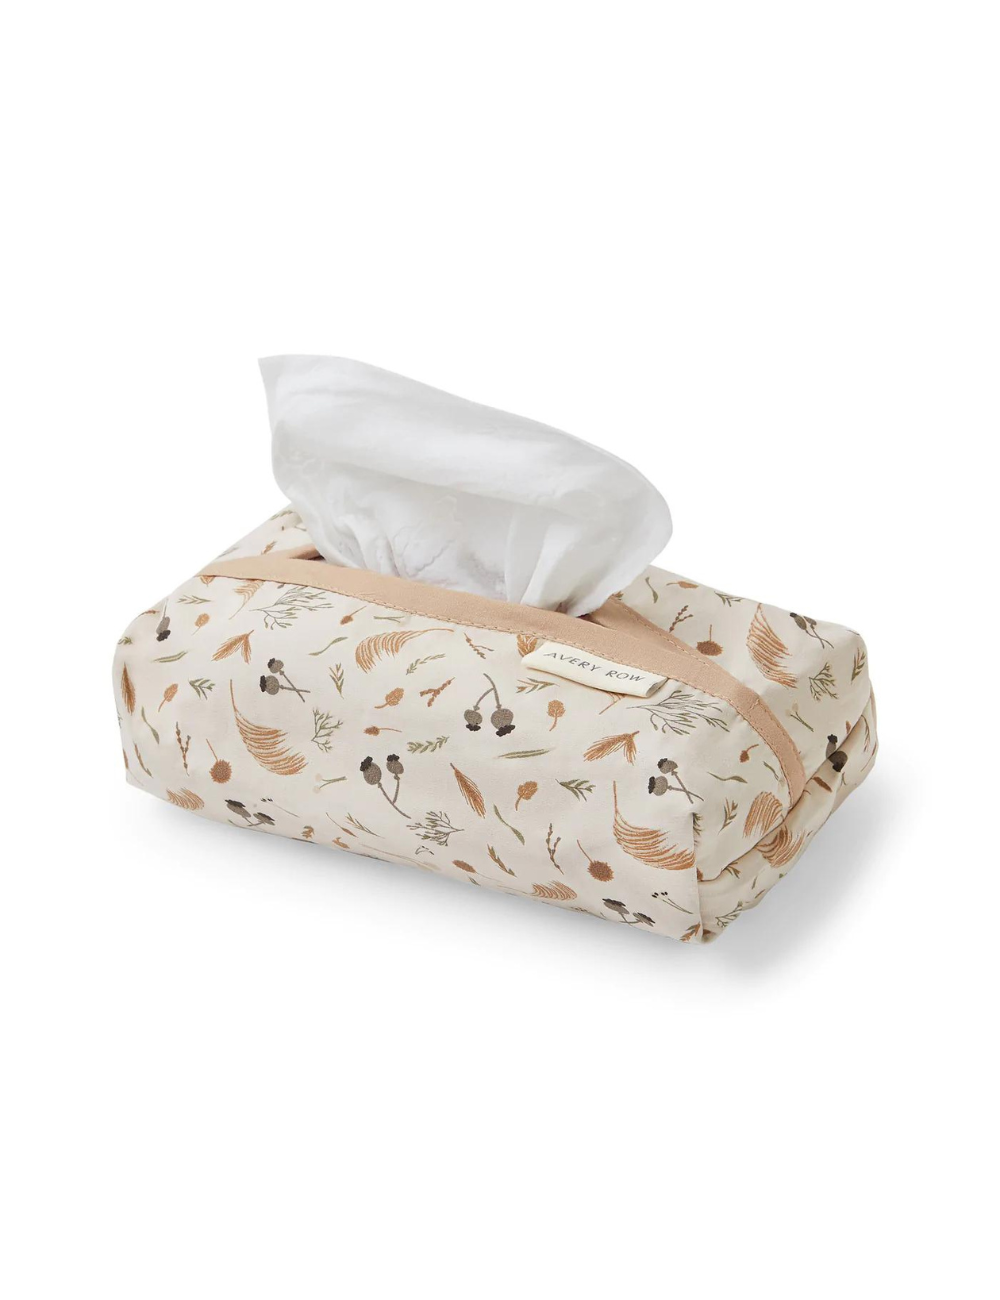 Baby Wipes Cover - Grasslands